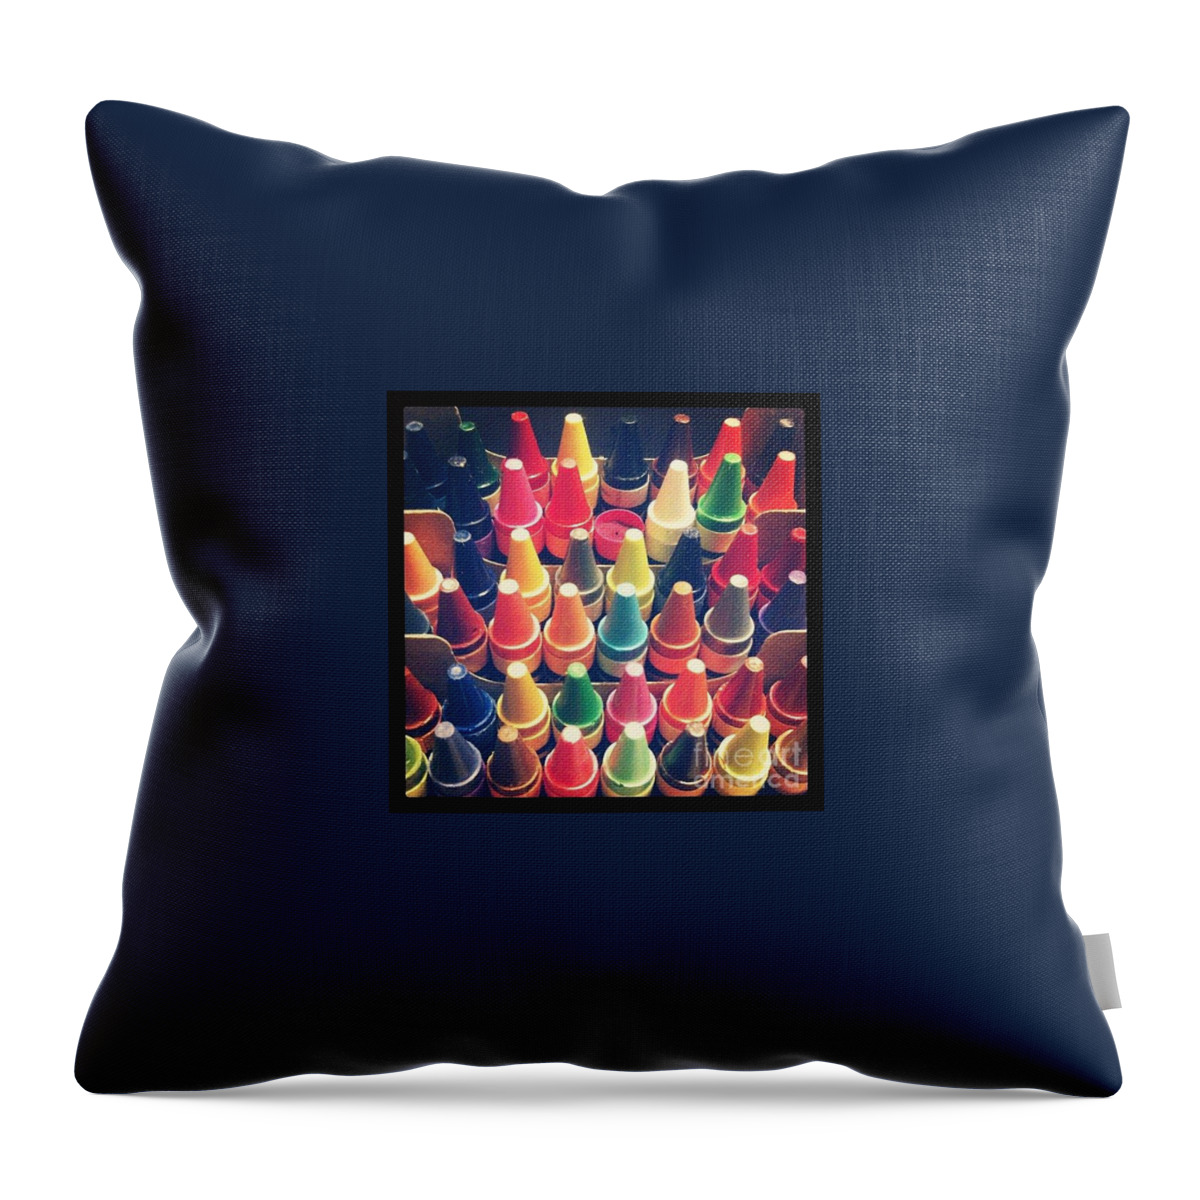 Crayons Throw Pillow featuring the photograph Odd Man Out by Denise Railey